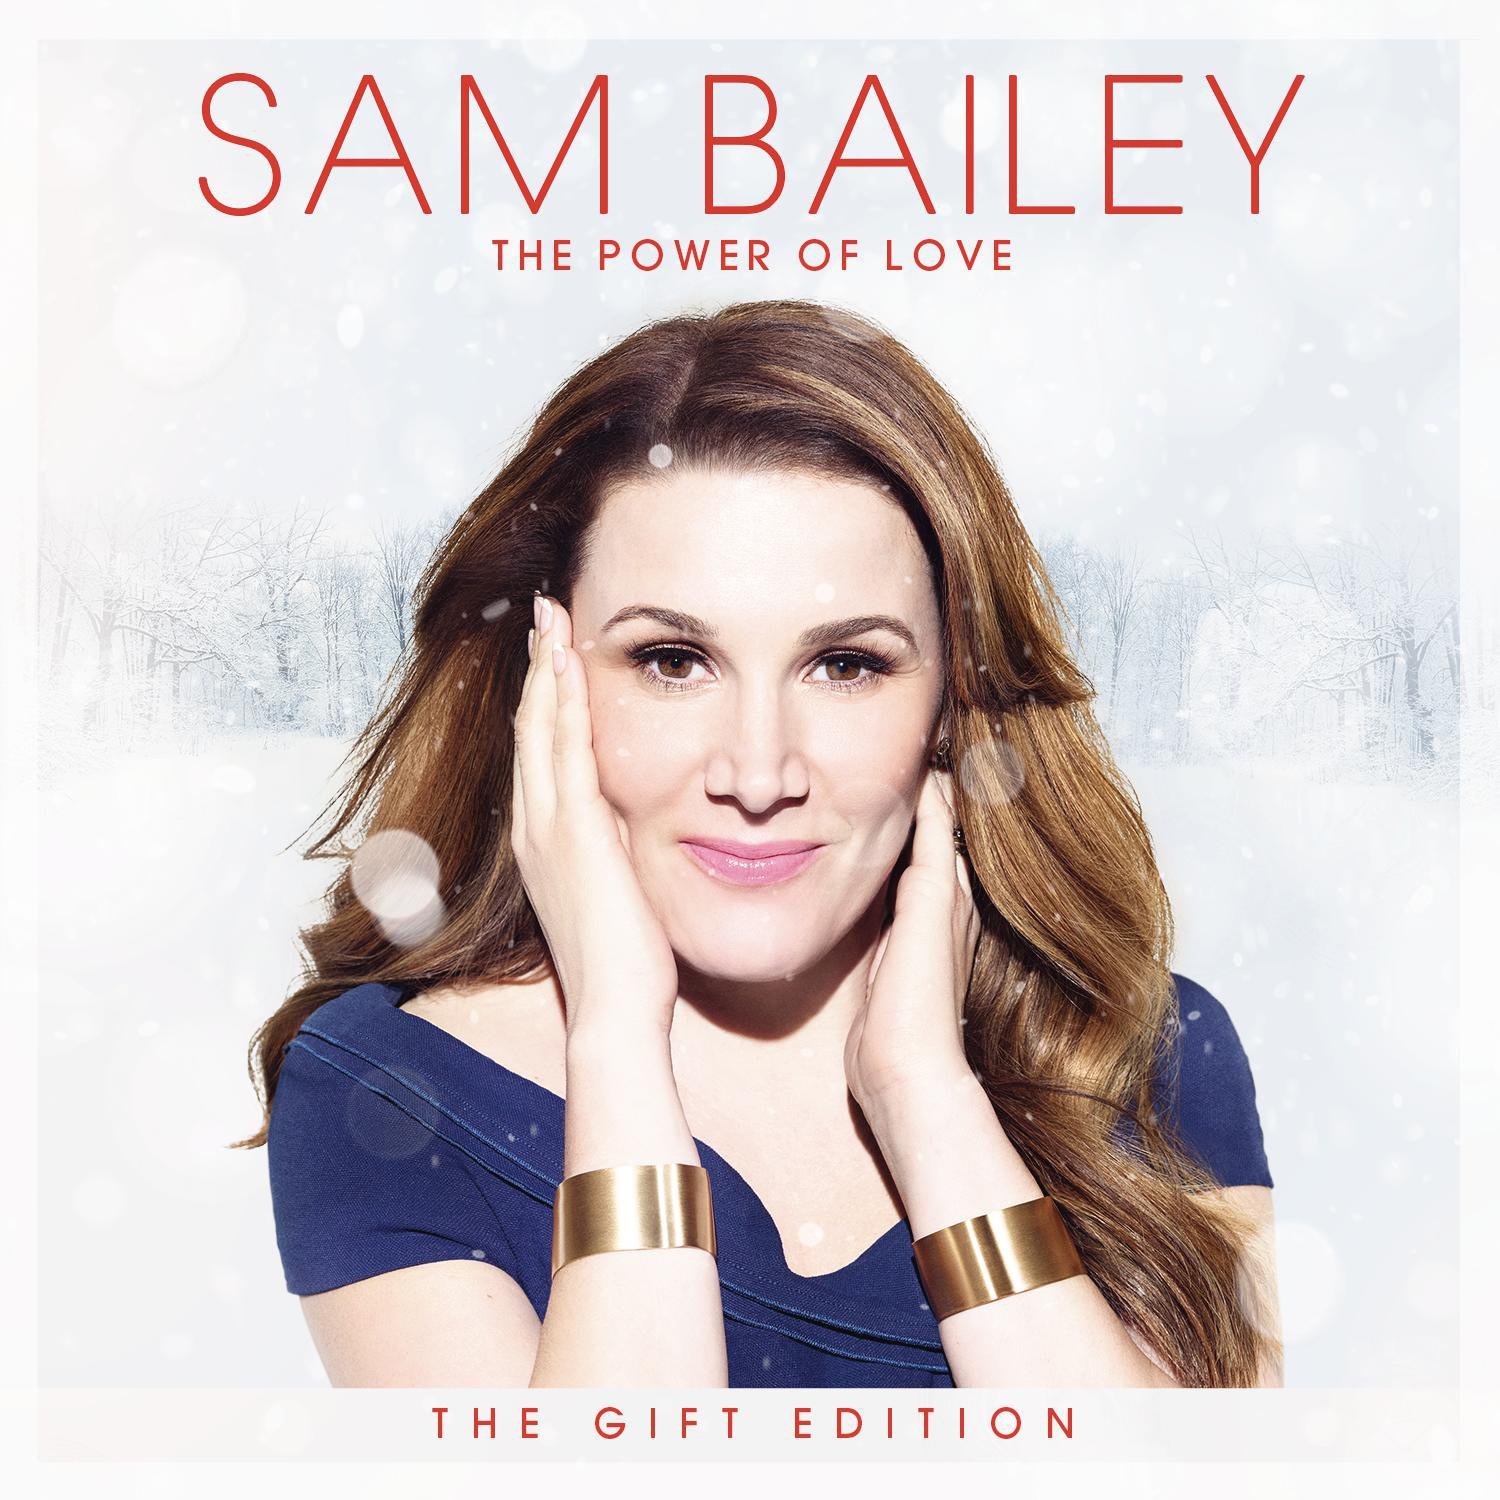 Sam Bailey - The Power Of Love (The Gift Edition) (Music CD)